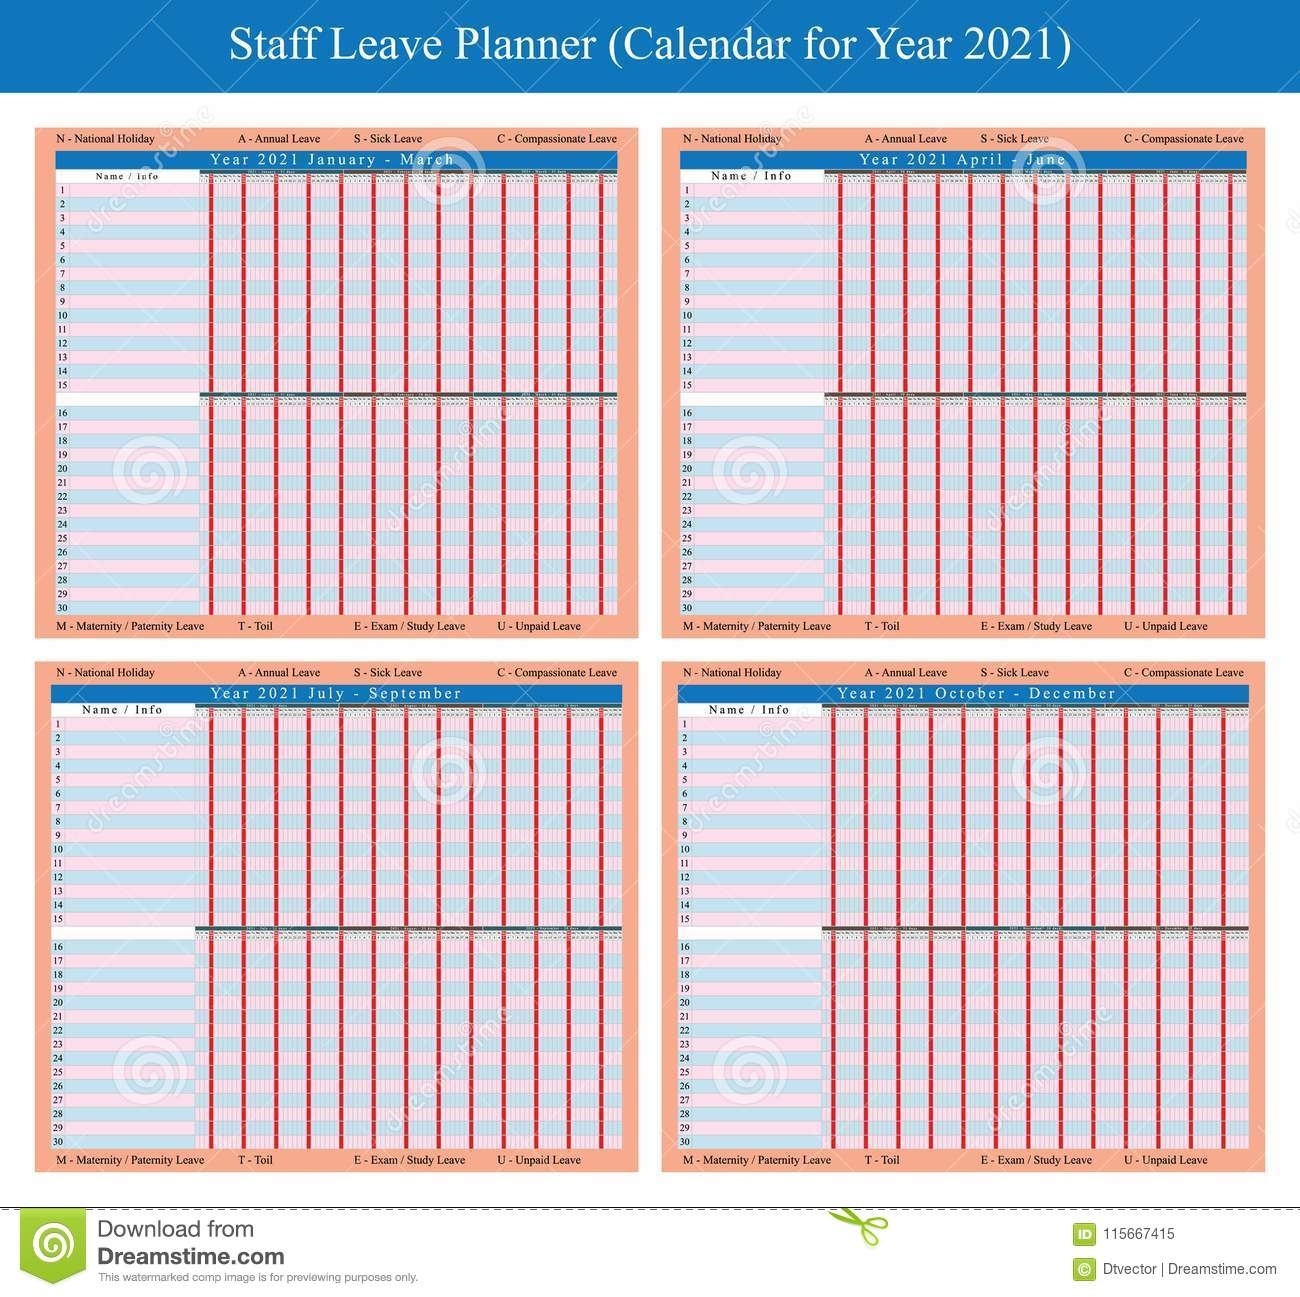 Staff Holiday Planner 2021 Stock Vector. Illustration Of Sick Day Calendar For Employees 2021